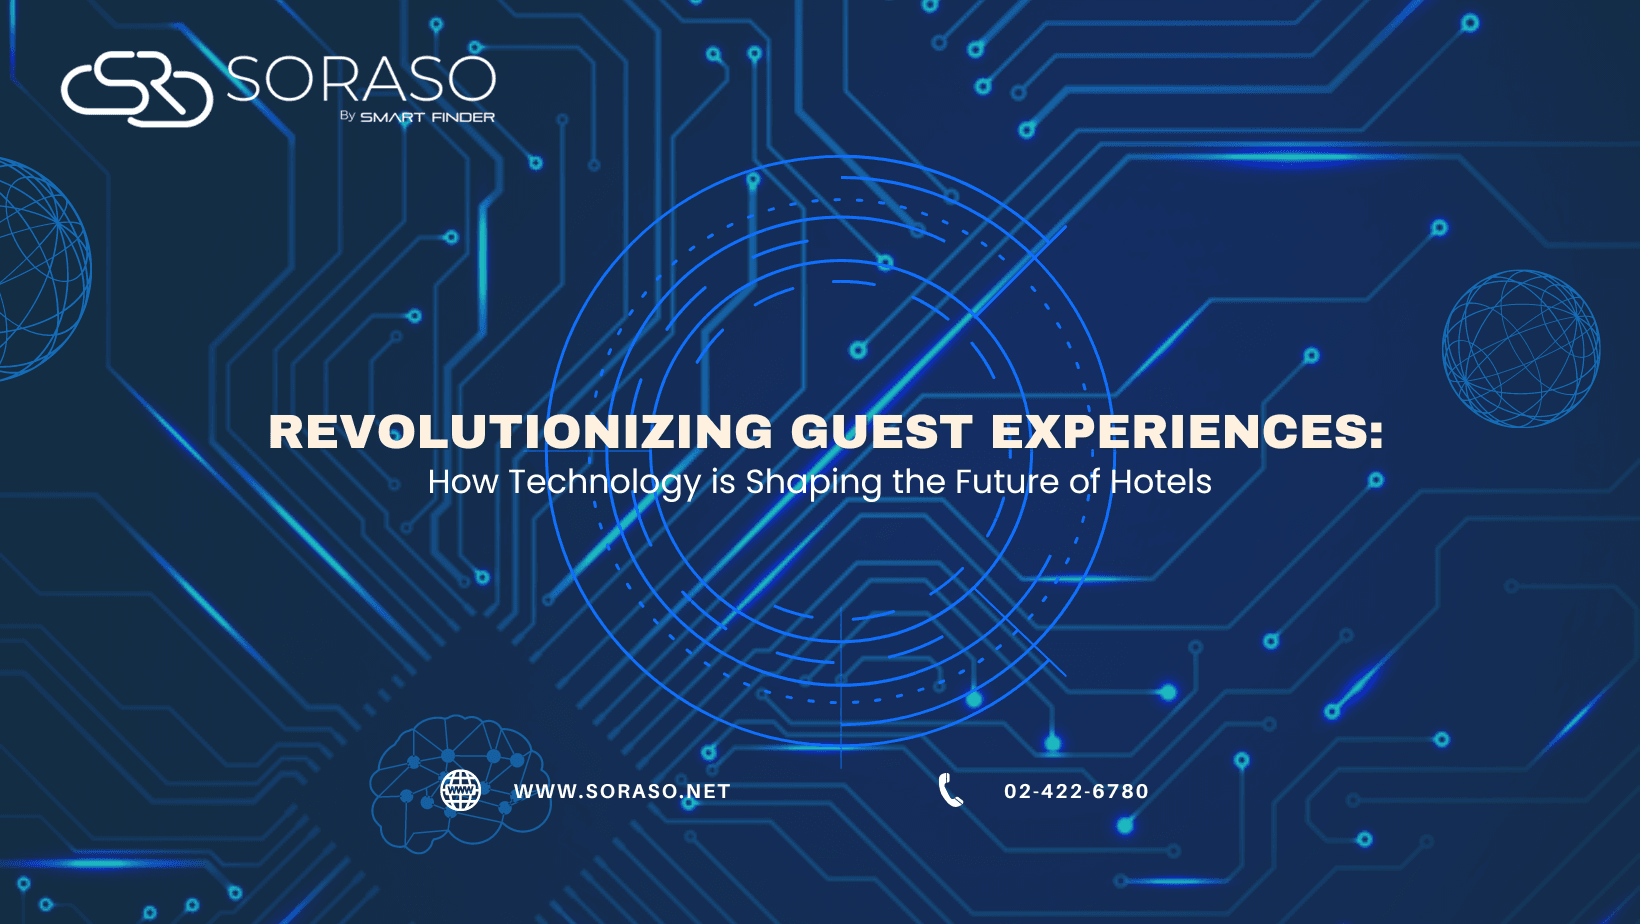 Revolutionizing Guest Experiences: How Technology is Shaping the Future of Hotels